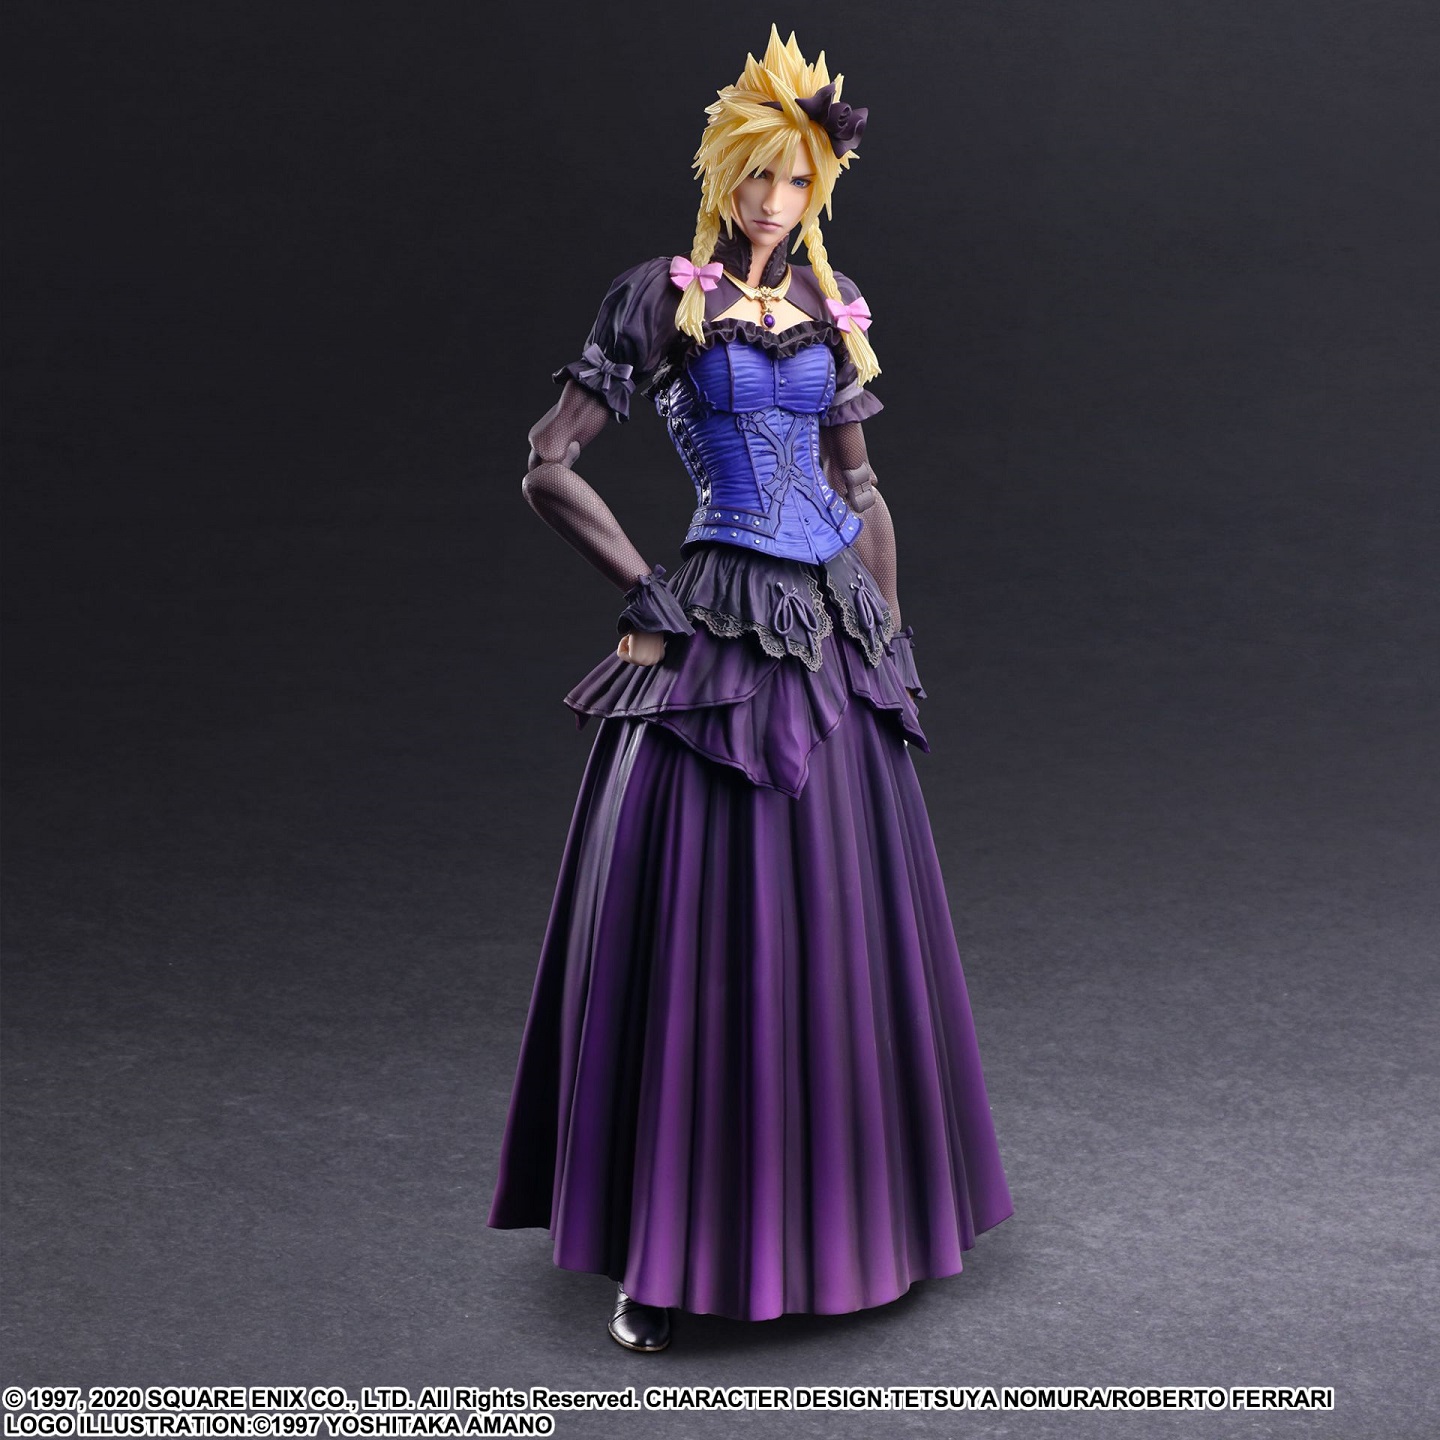 A toned, masculine human stands with a firm look and one hand on their hip, wearing a dress with a bright blue bodice, and dark purple embellishments and skirt. They have blonde, spikey hair with braided pigtails coming from the sides. 